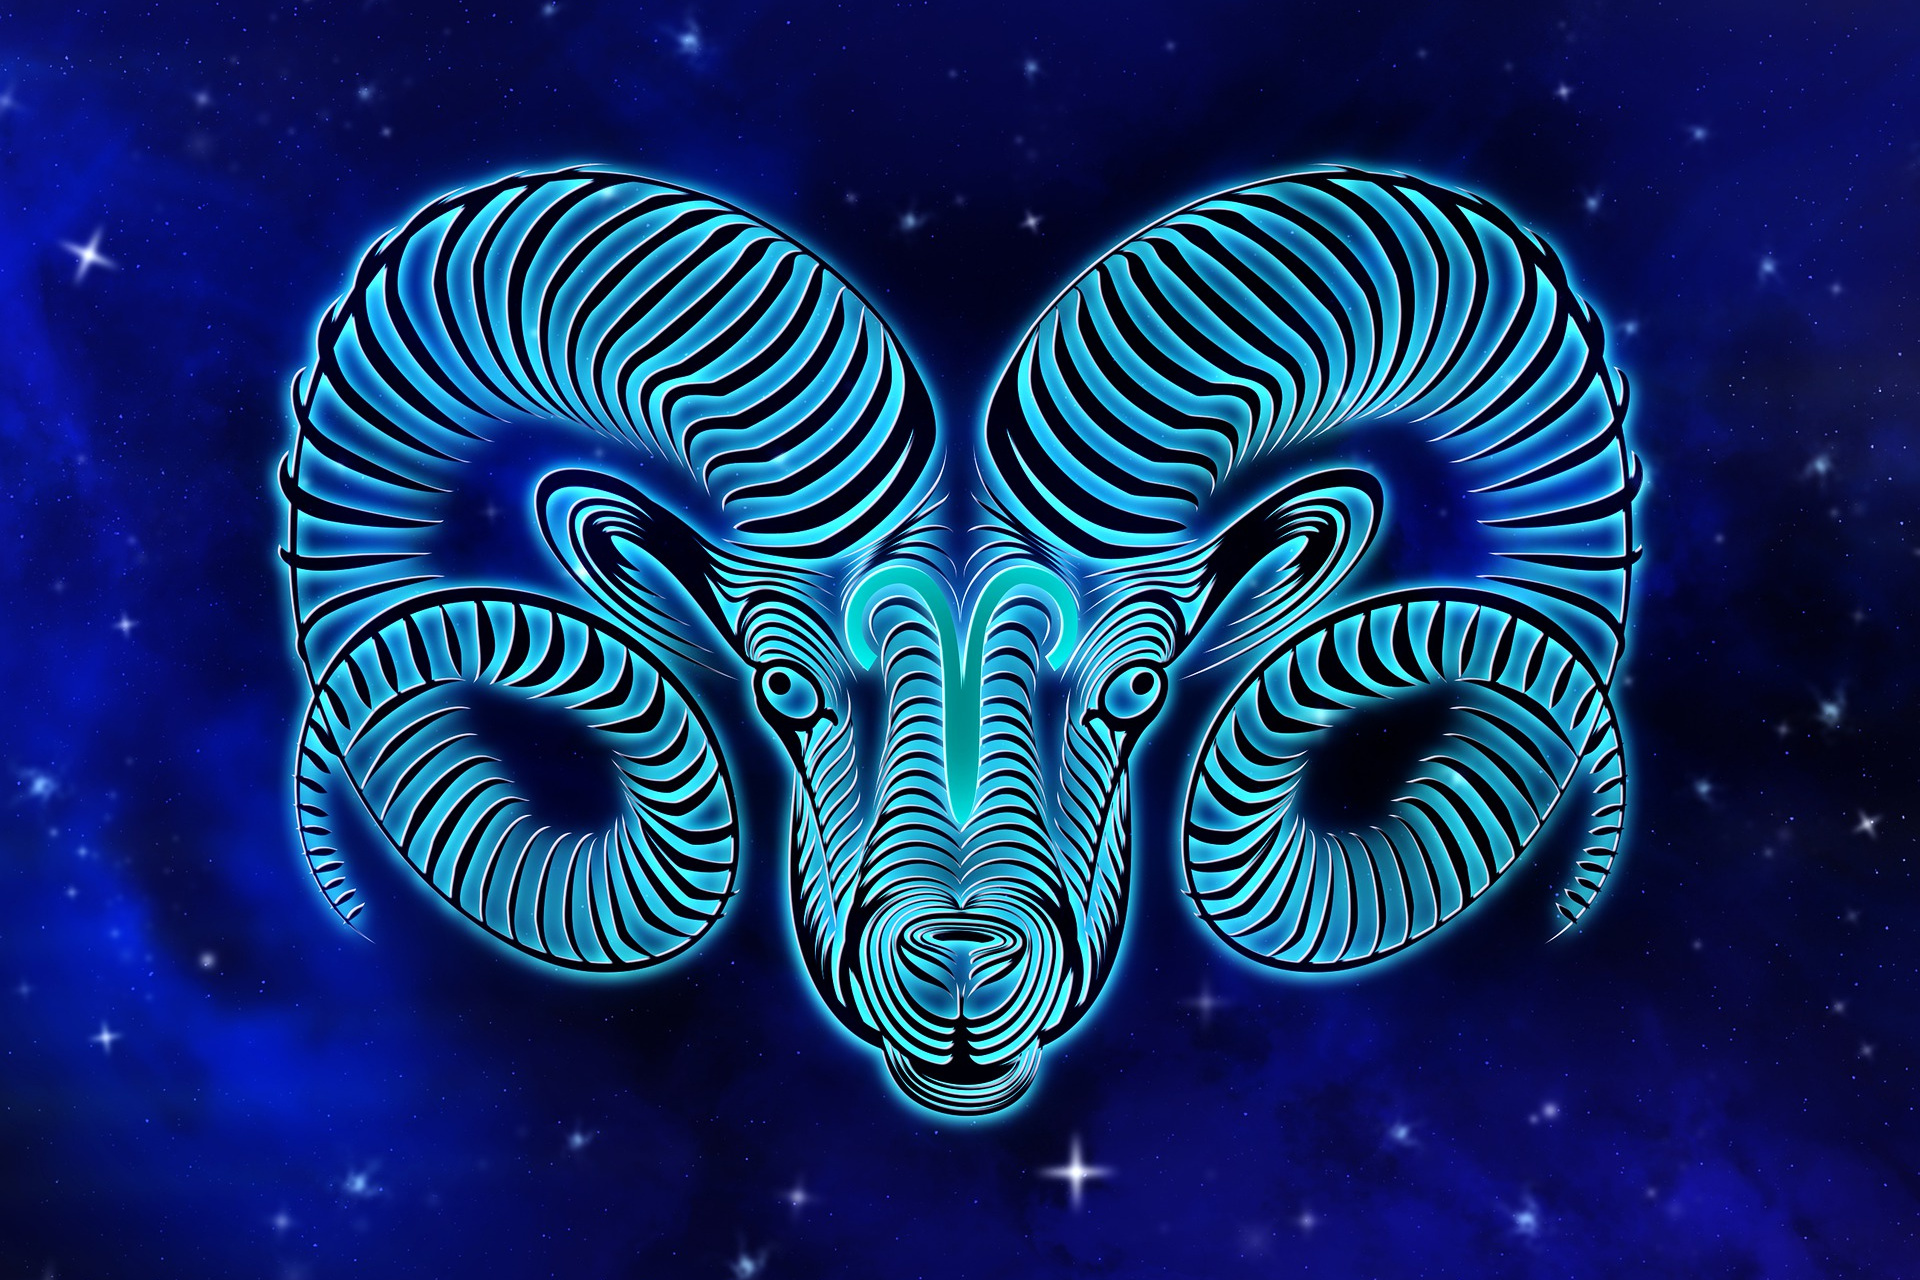 Aries (March 21 to April 20)